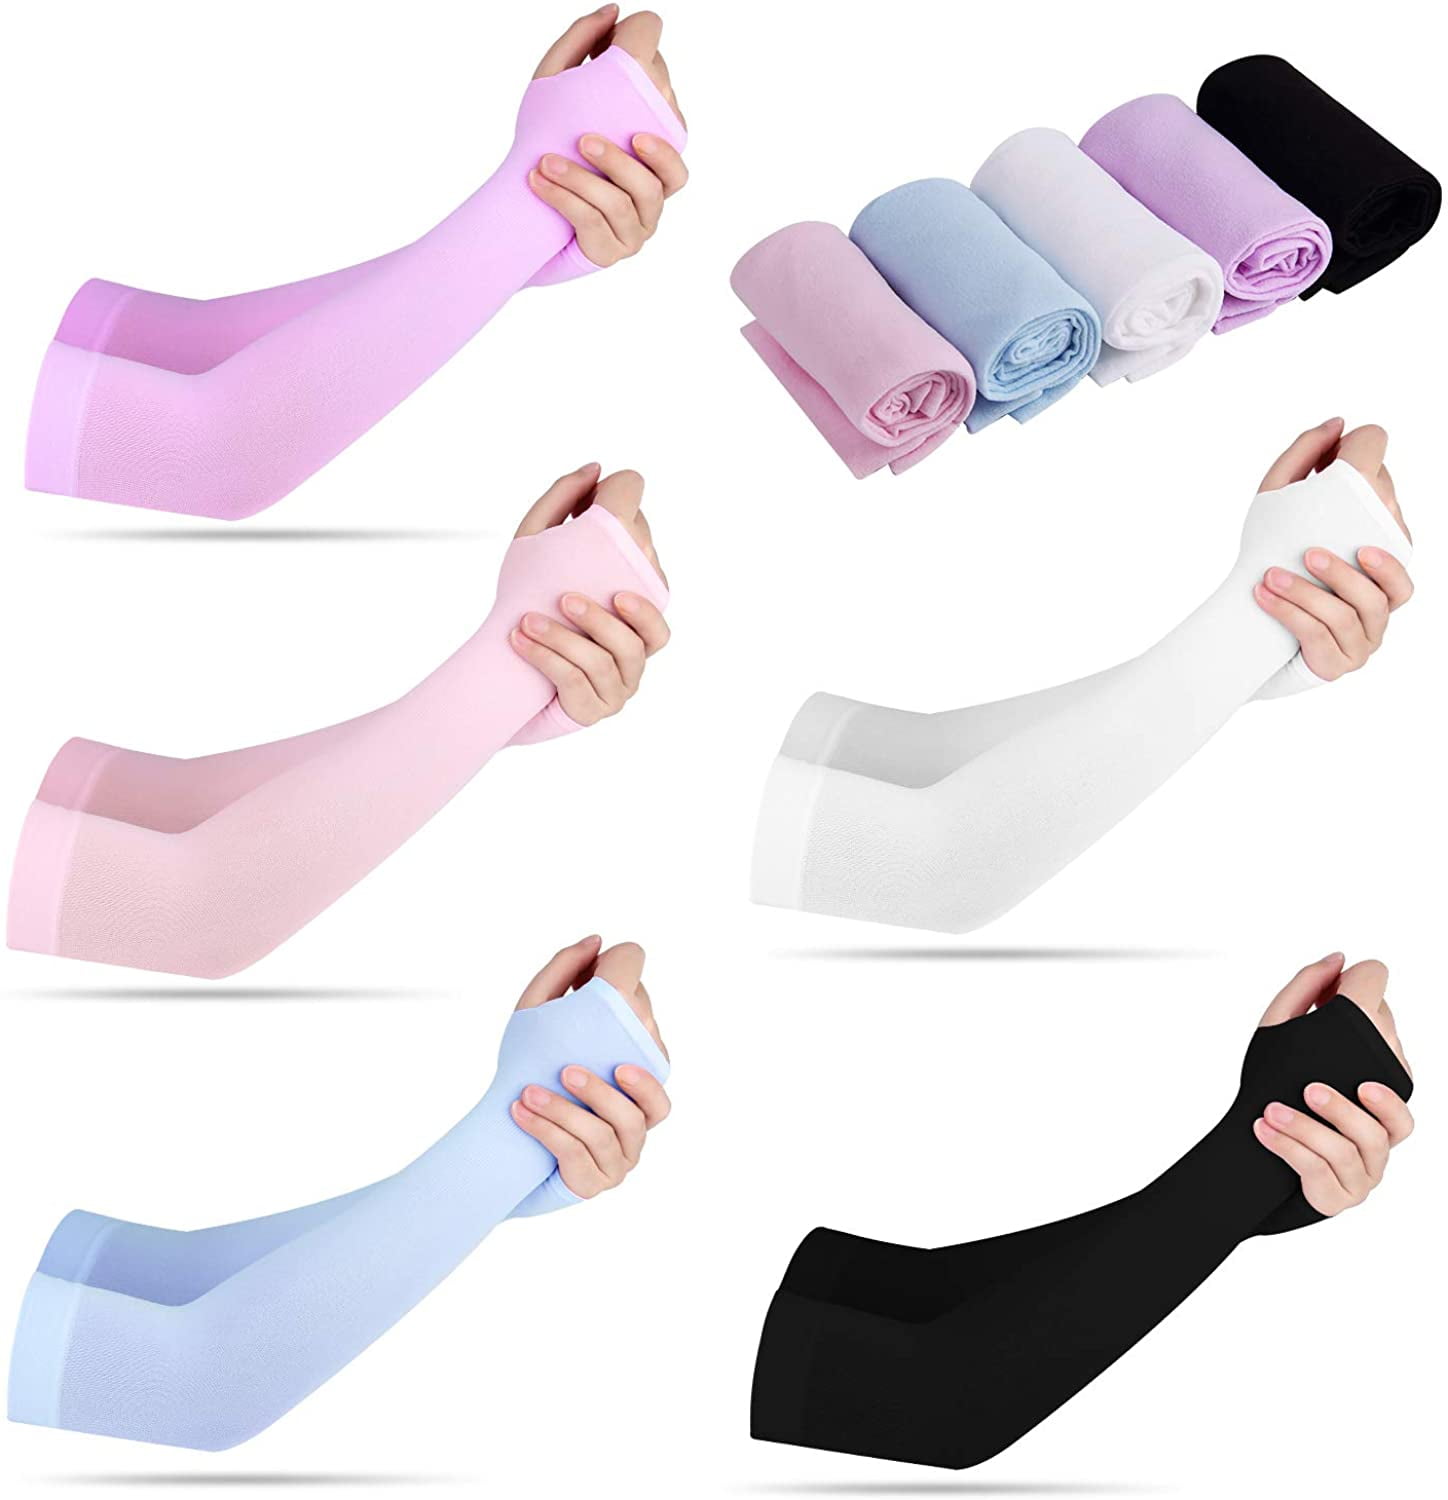 10 Pairs Cooling Arm Sleeves UV Protection for Elbow Brace Baseball Basketball 